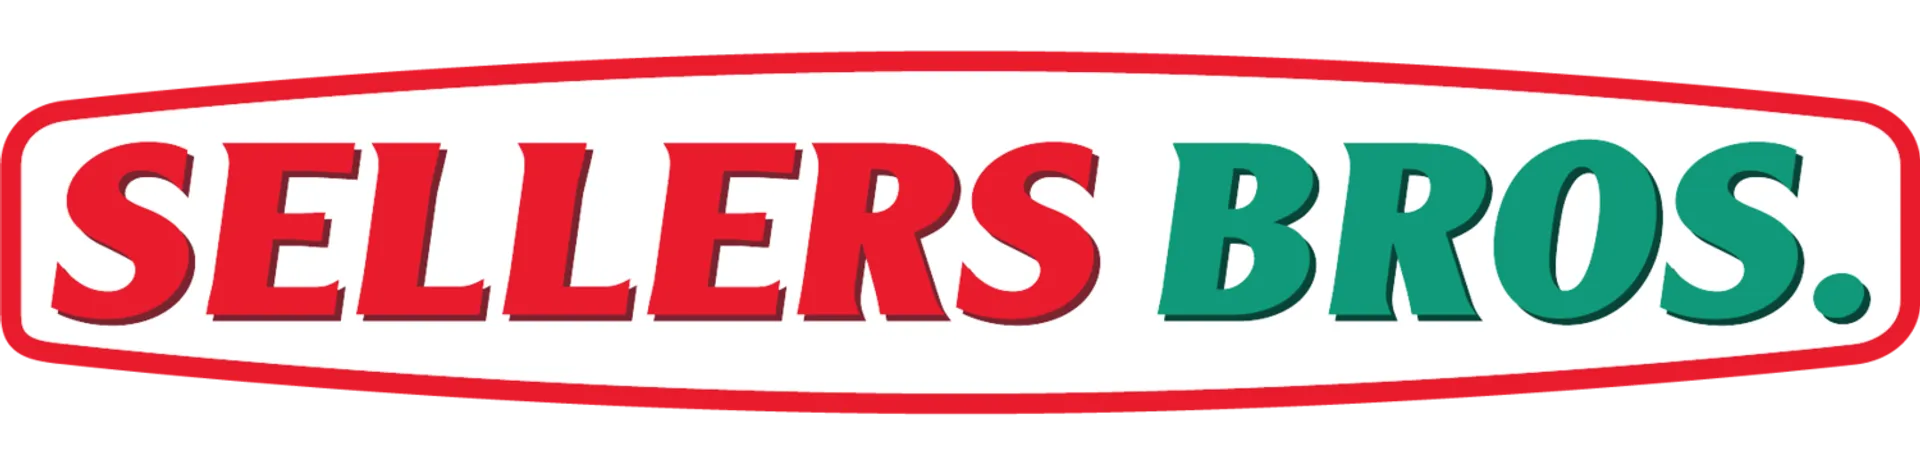 SELLERS BROS logo. Current weekly ad